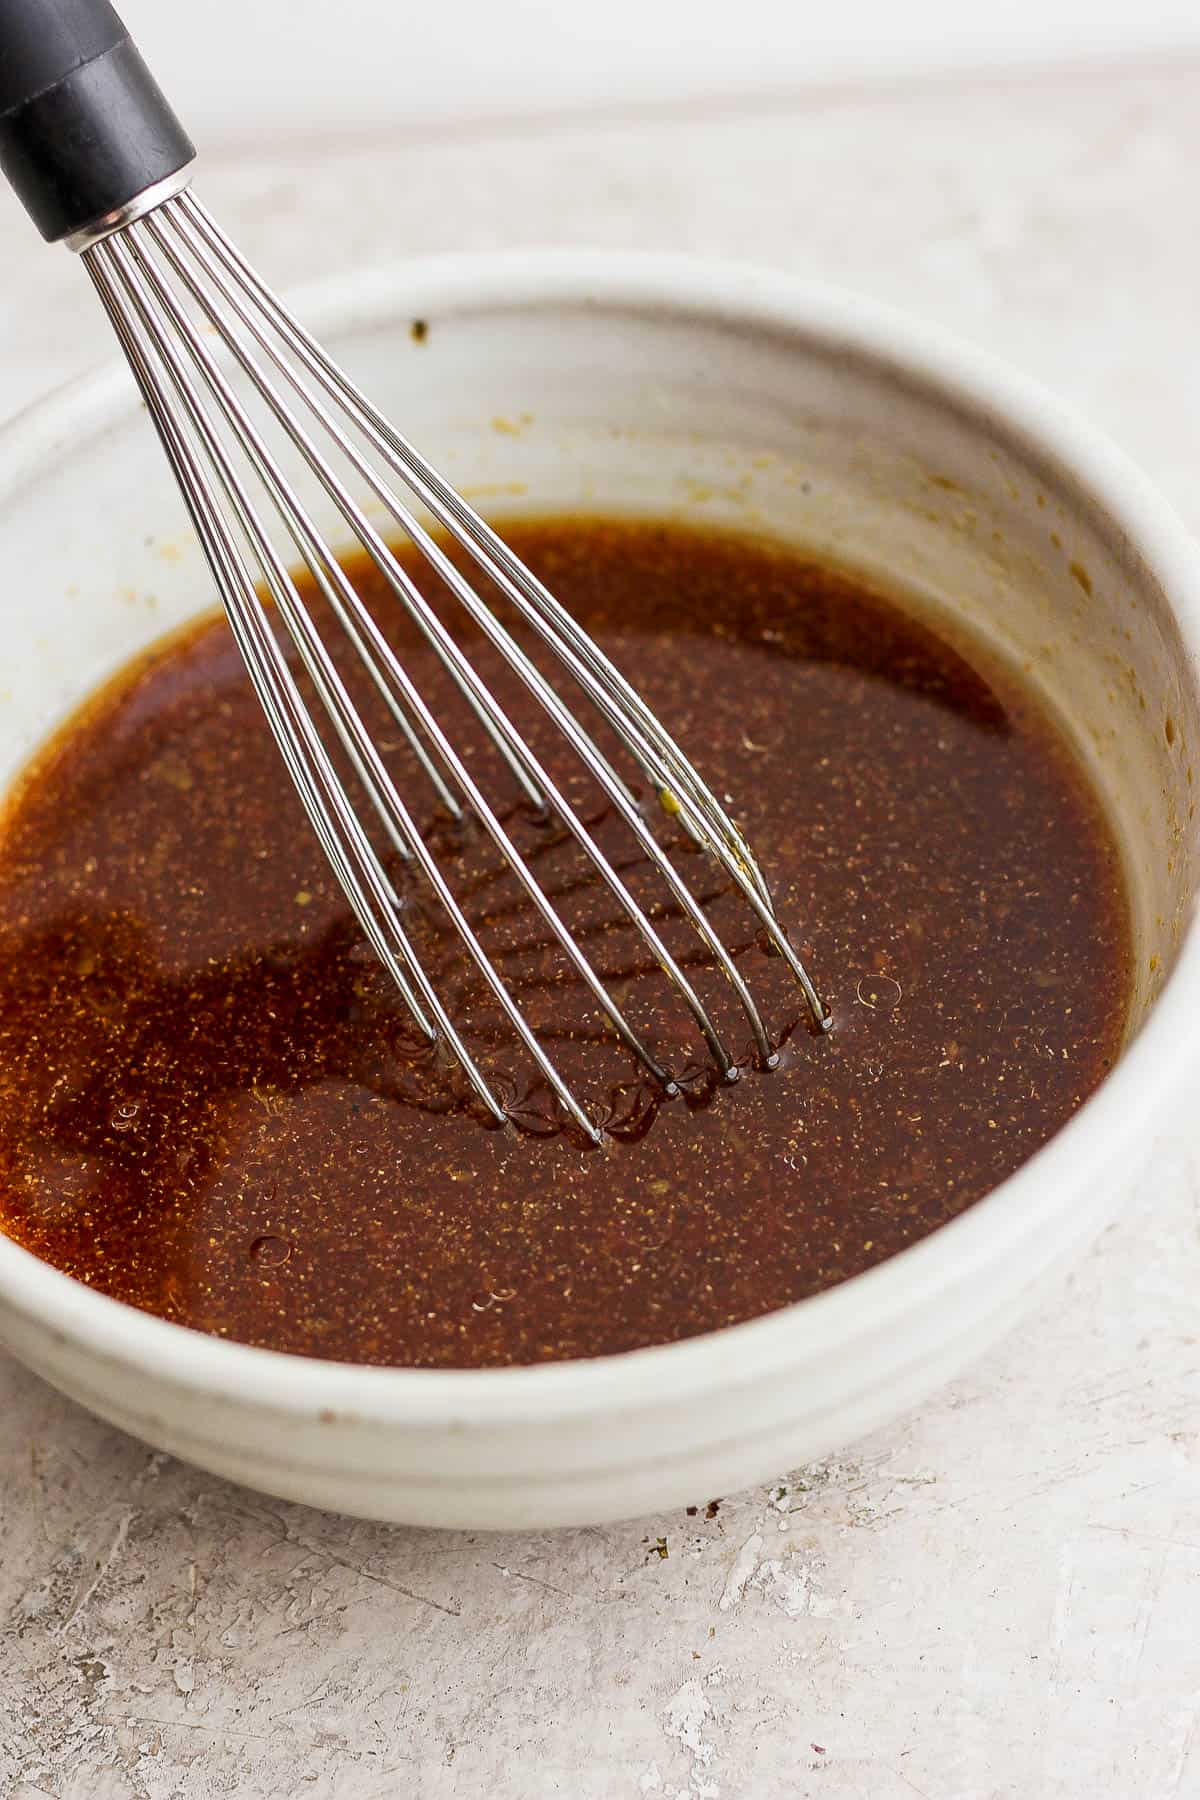 The rib marinade whisked together in a small bowl.